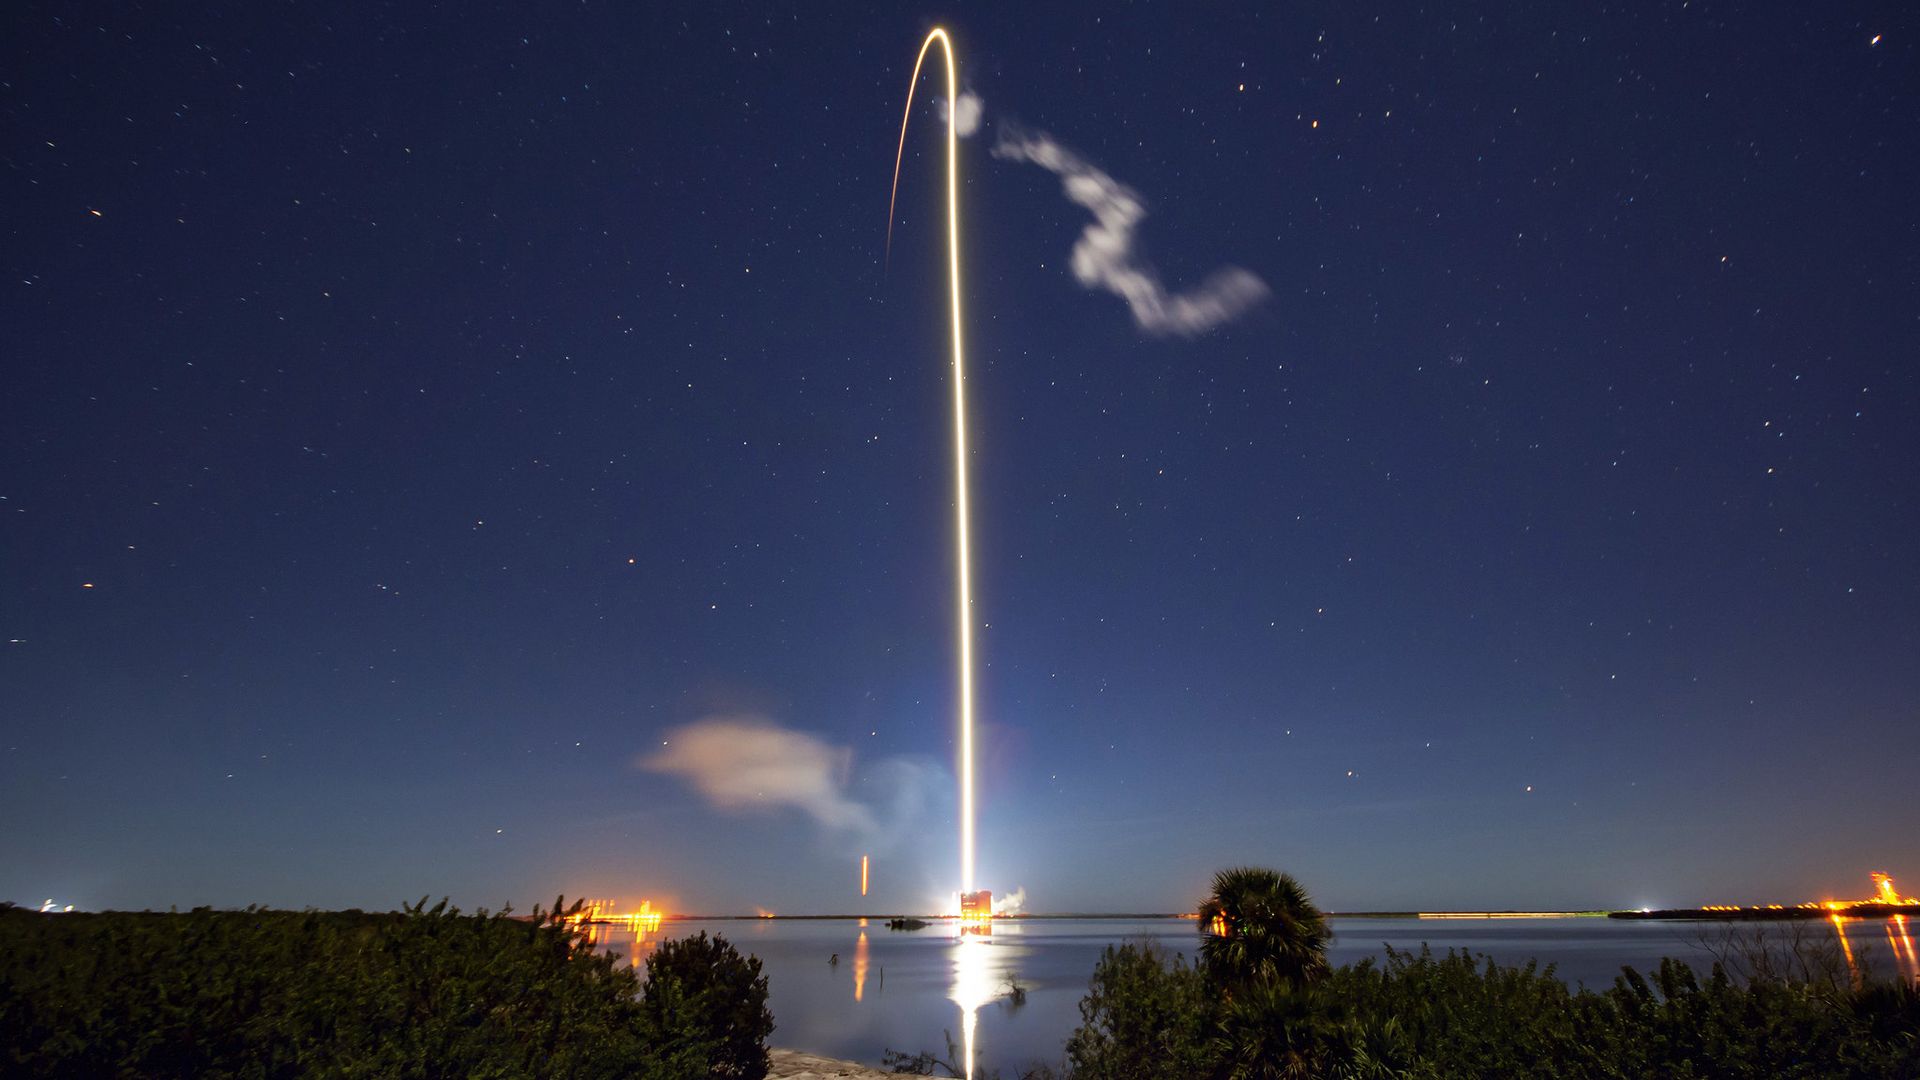 A streak of light into a darkened sky in Florida created by a SpaceX rocket launching a clutch of Starlink satellites to orbit